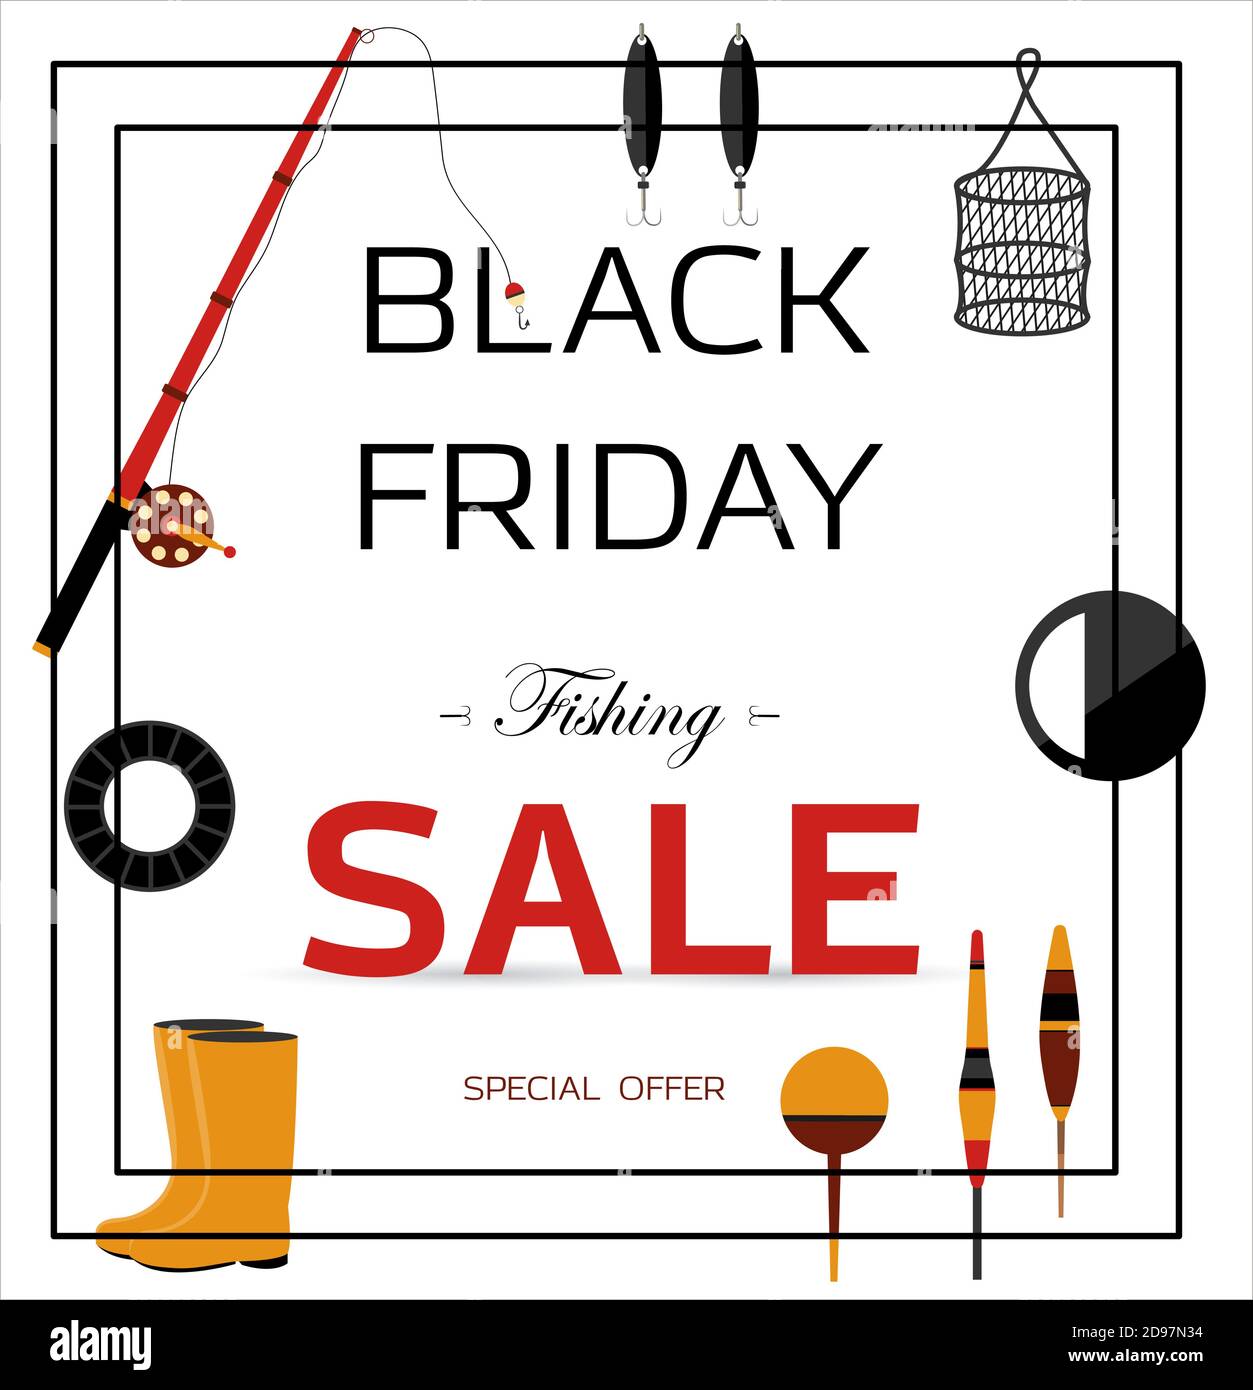 https://c8.alamy.com/comp/2D97N34/advertising-poster-for-black-friday-shop-that-sells-fishing-products-and-gear-banner-for-discounts-and-sales-a-poster-with-an-inscription-and-a-special-offer-of-the-store-online-store-with-home-delivery-vector-illustration-2D97N34.jpg